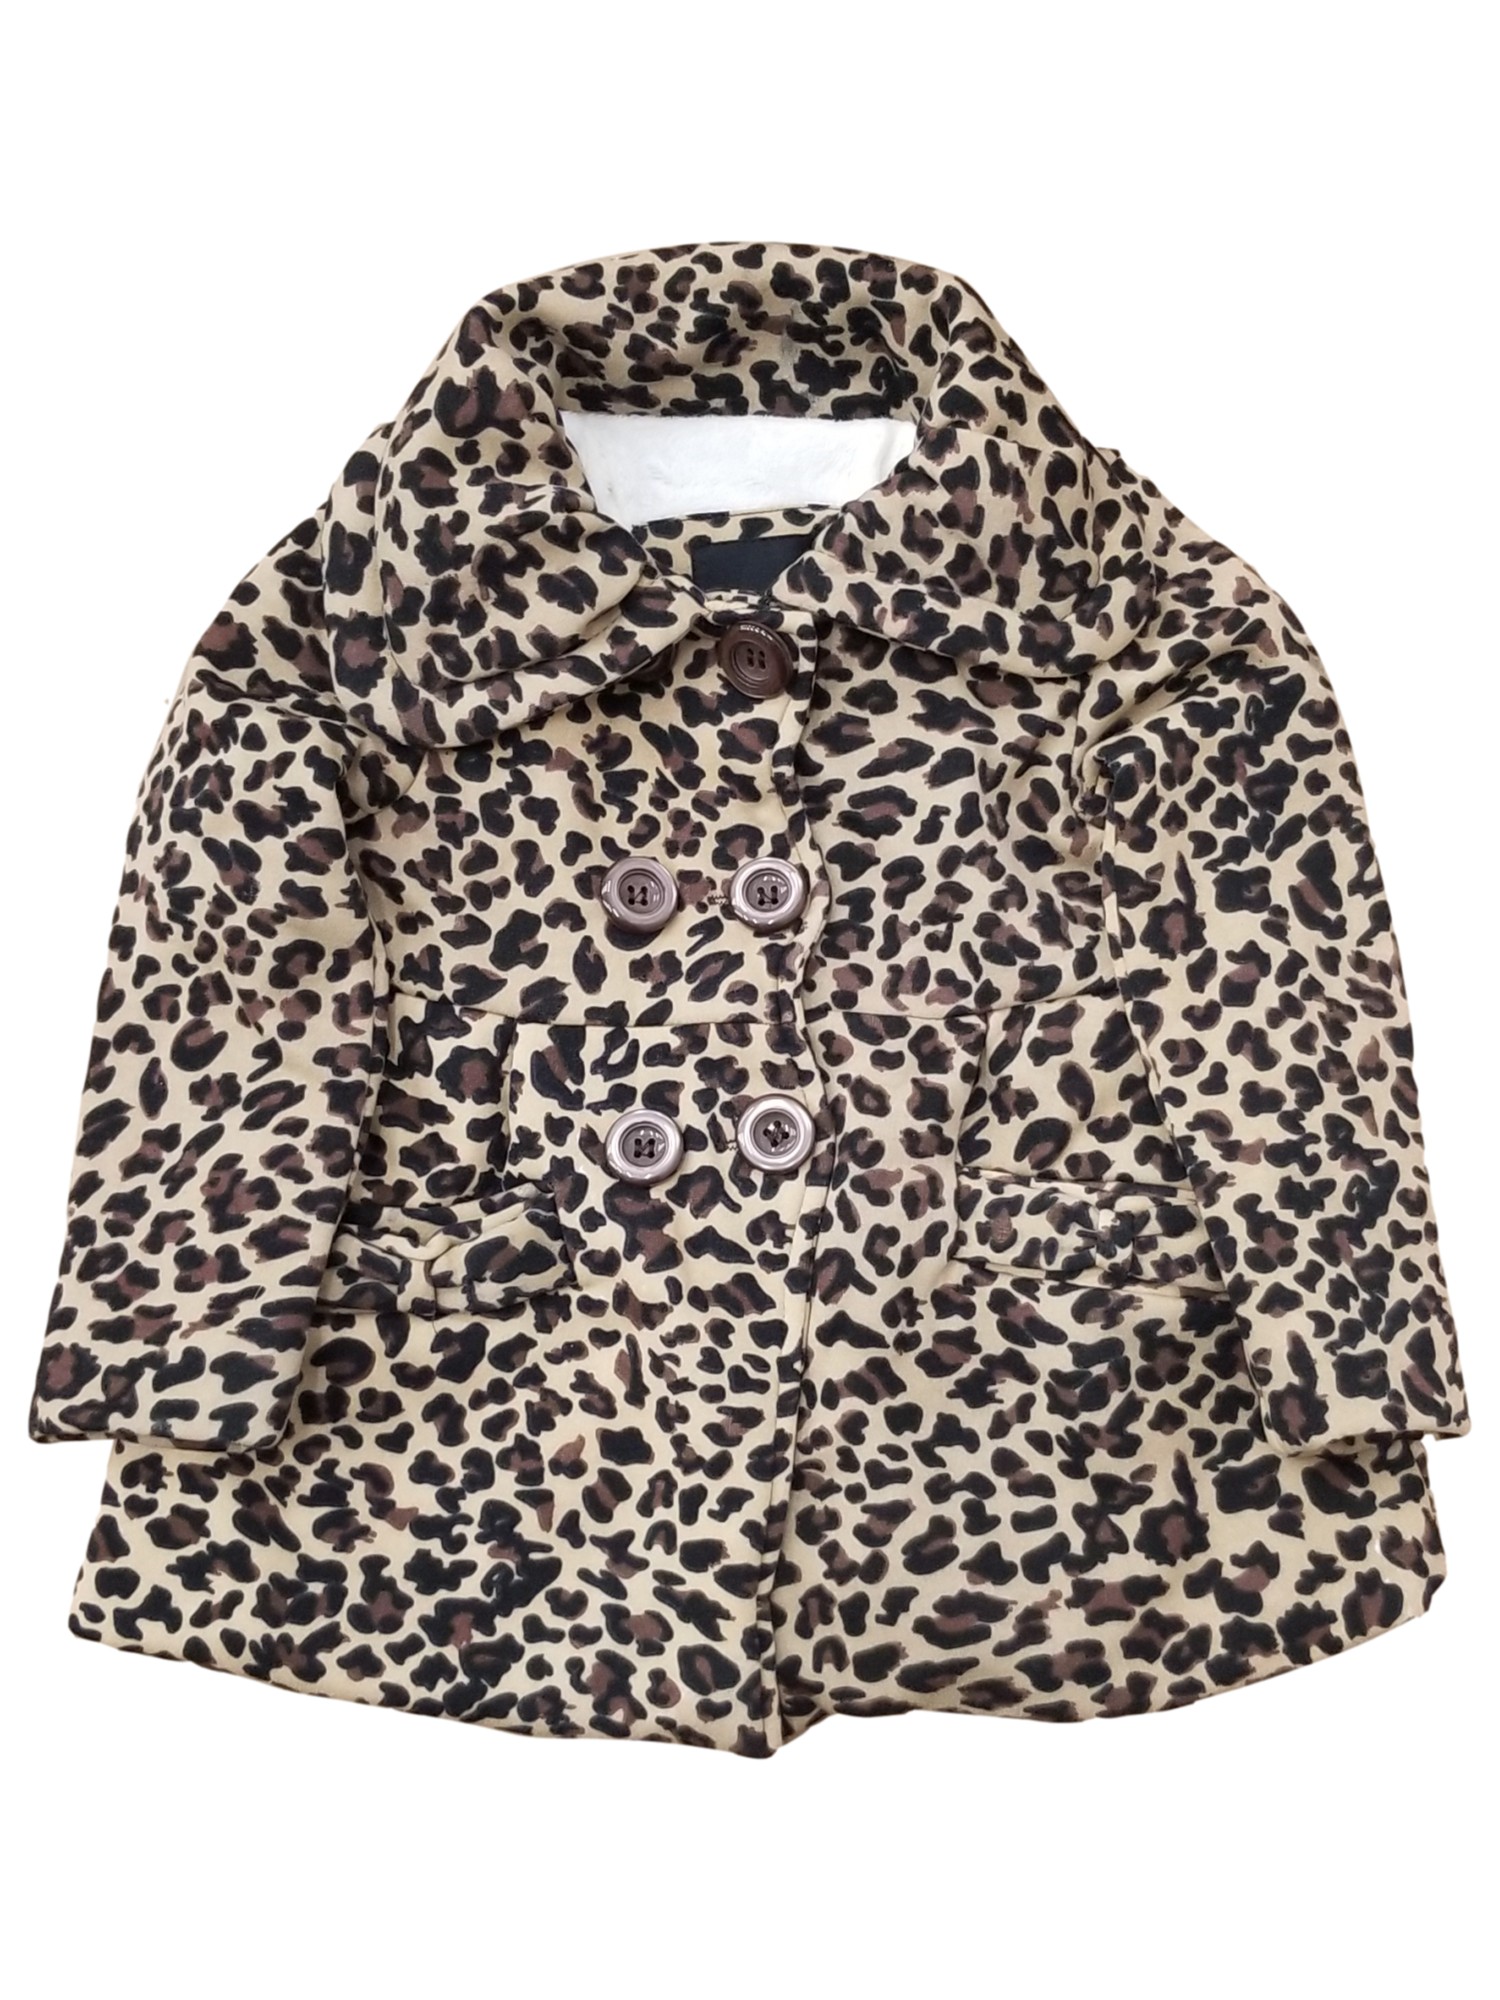 Toddler Girls Tan Leopard Print Button Up Pea Coat Jacket Faux Fur Lining 3T - image 1 of 2